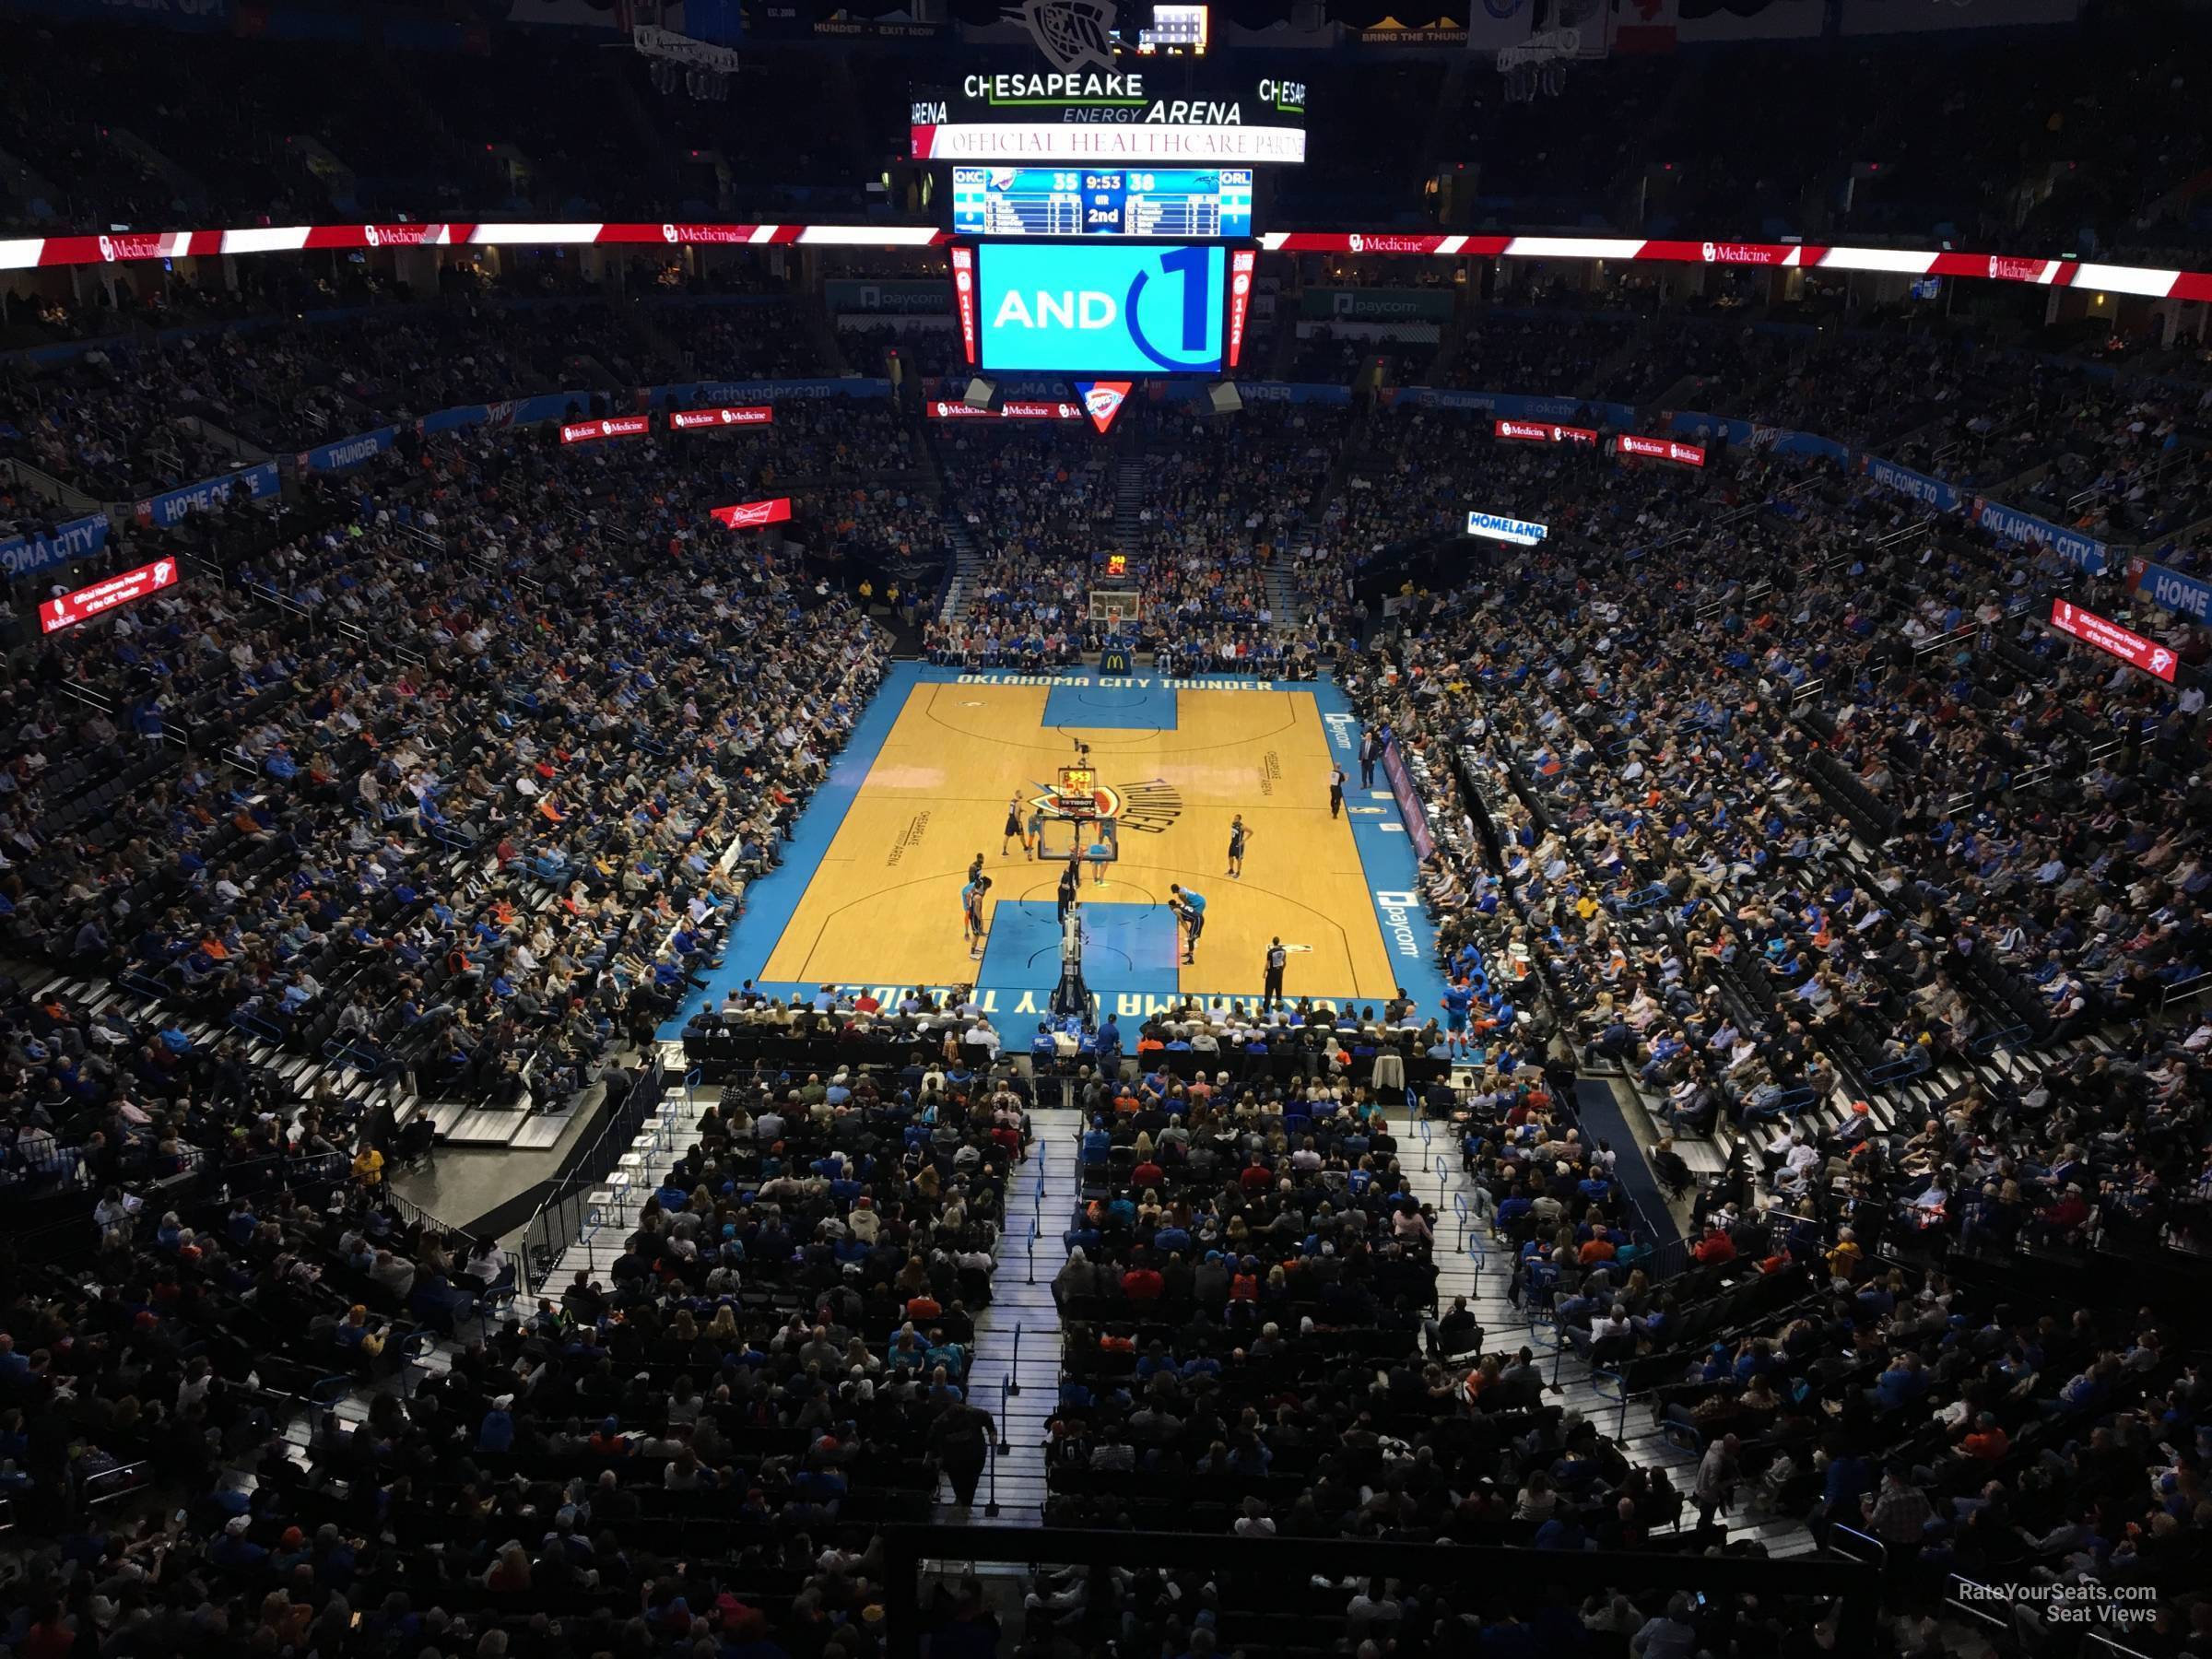 section 301, row a seat view  for basketball - paycom center